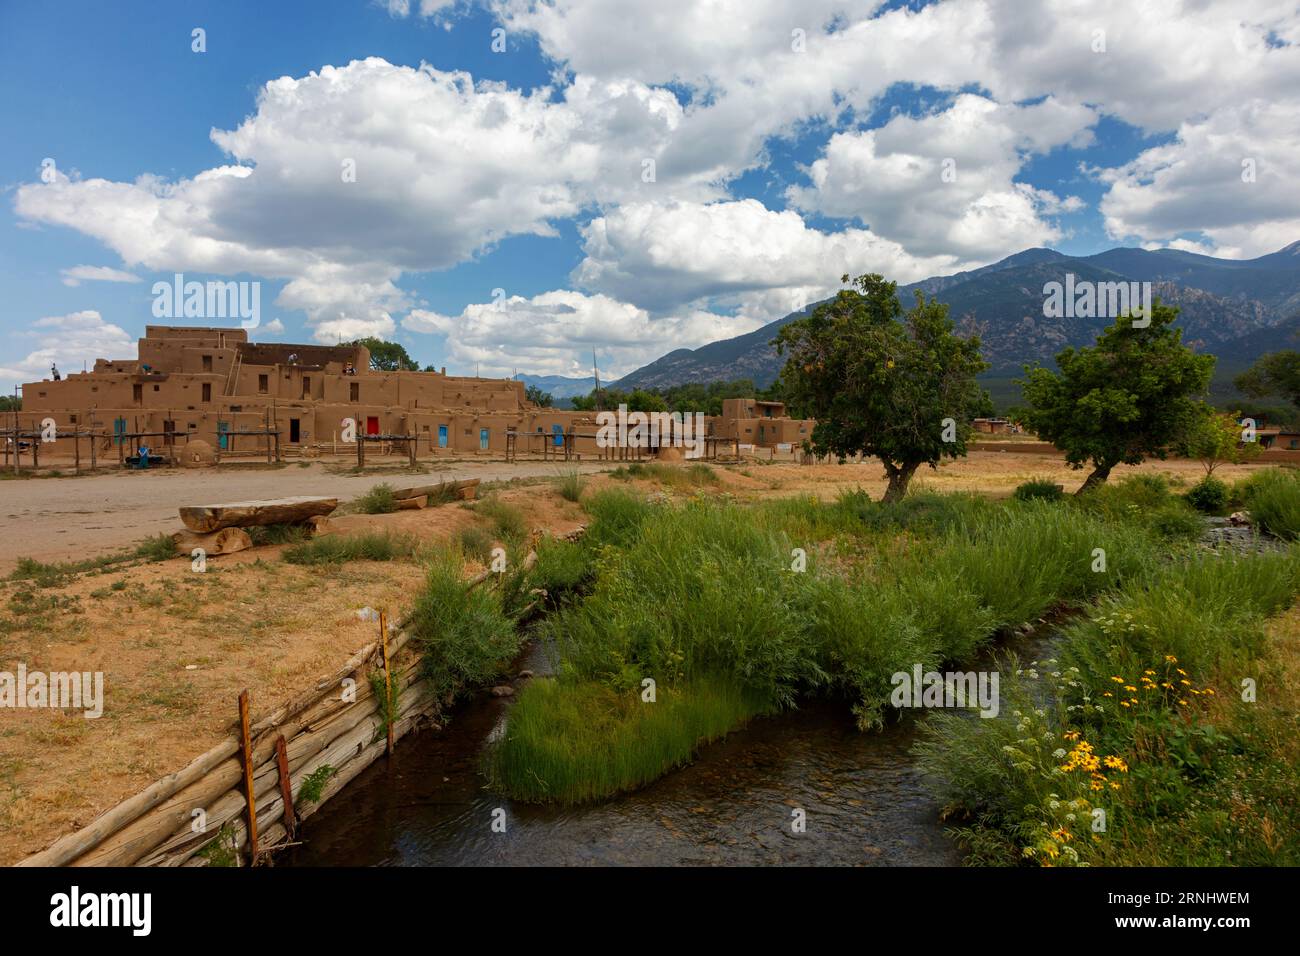 The Taos Pueblo was built by the Tiwa tribe and is one of the oldest continuously inhabited places in the US - New Mexico Stock Photo